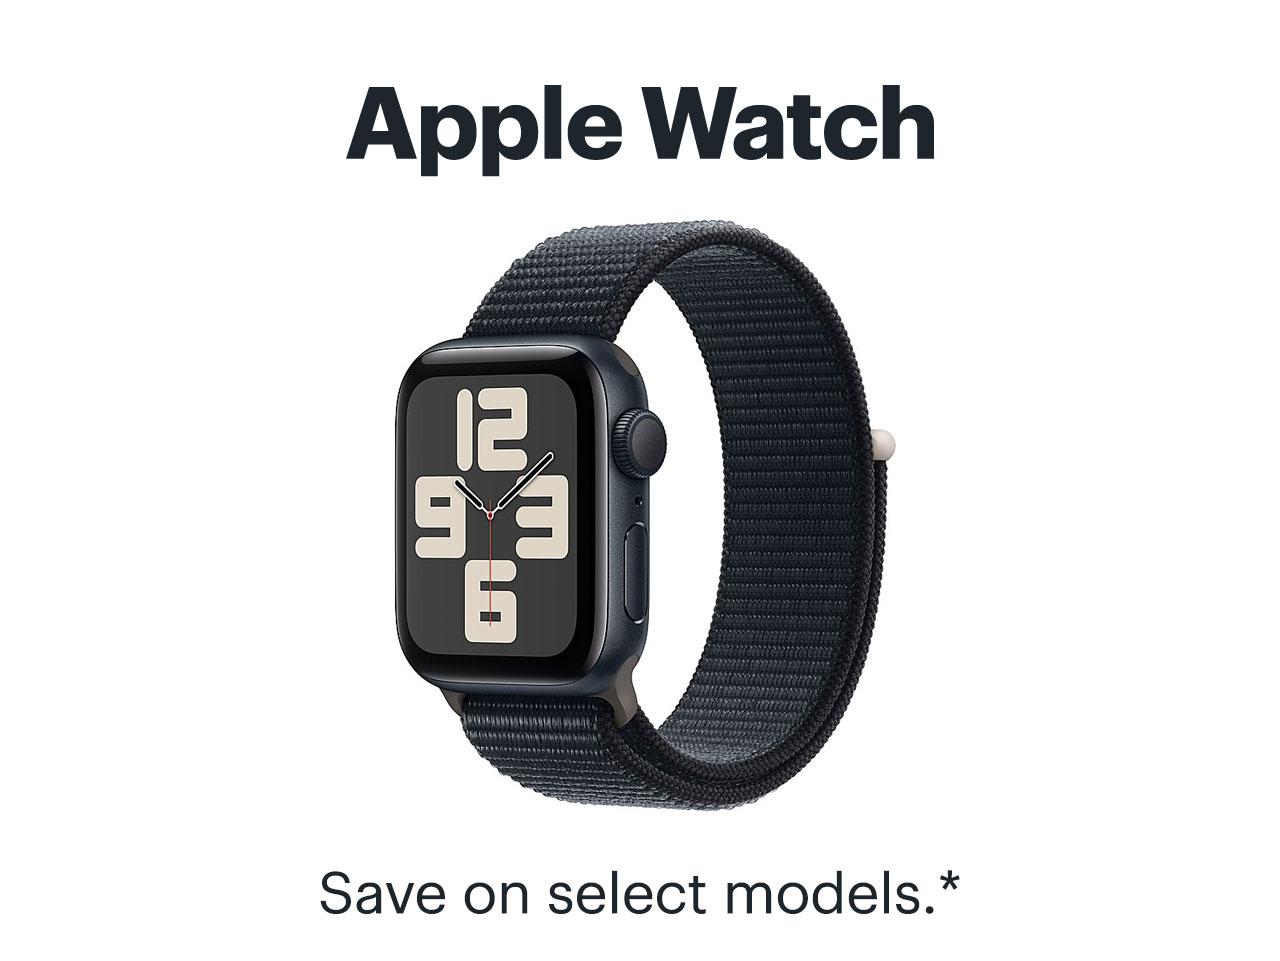 Apple Watch. Save on select models. Reference disclaimer.